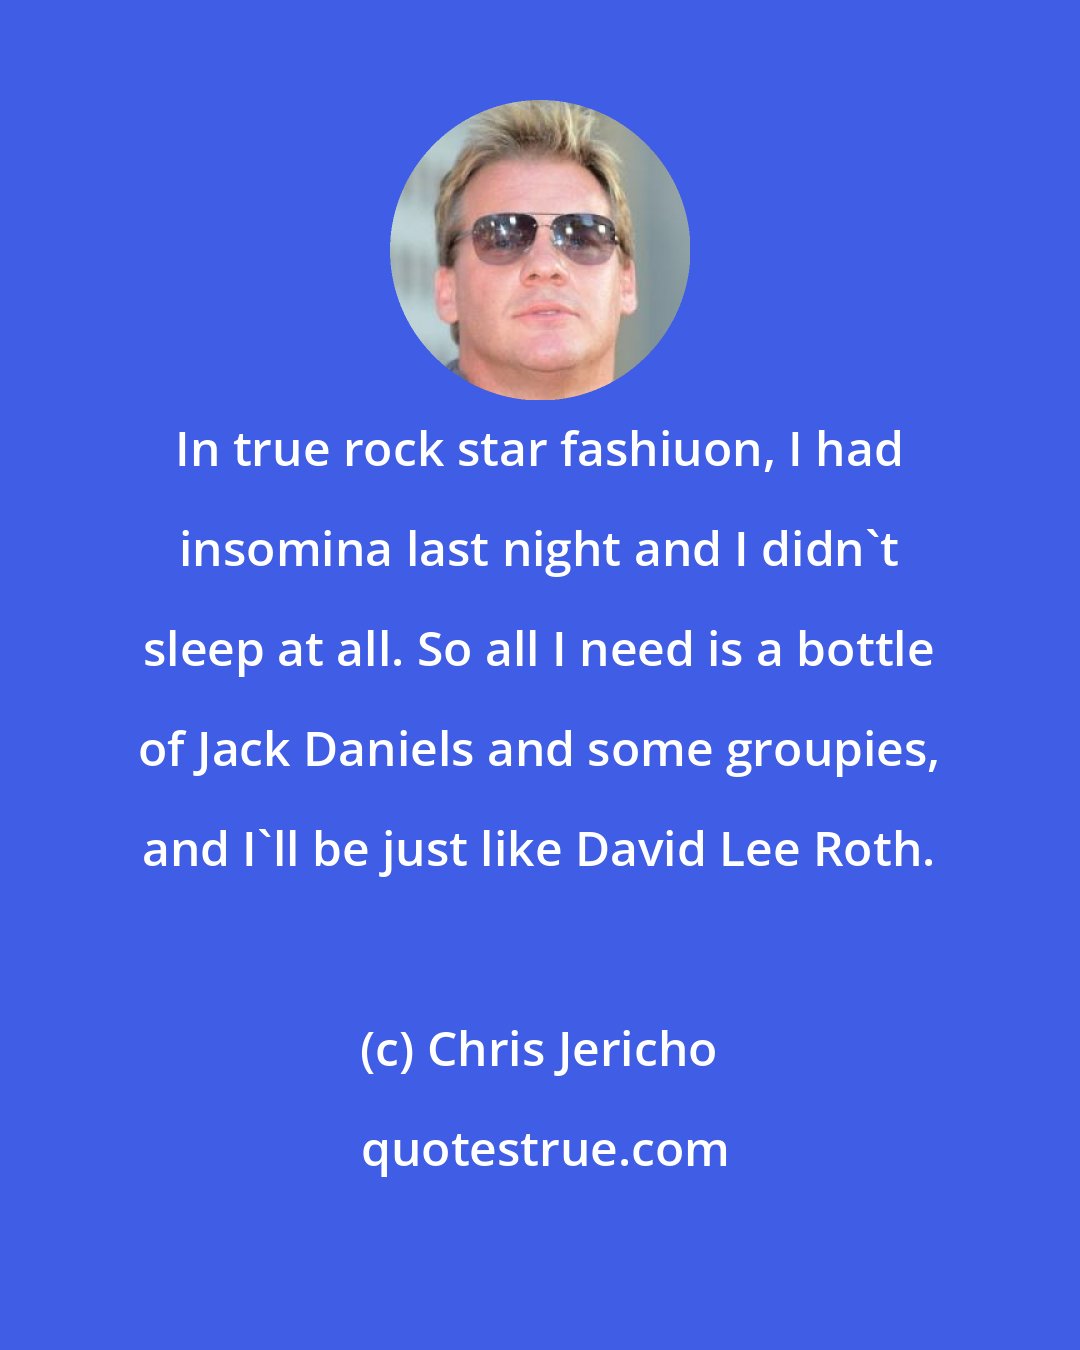 Chris Jericho: In true rock star fashiuon, I had insomina last night and I didn't sleep at all. So all I need is a bottle of Jack Daniels and some groupies, and I'll be just like David Lee Roth.